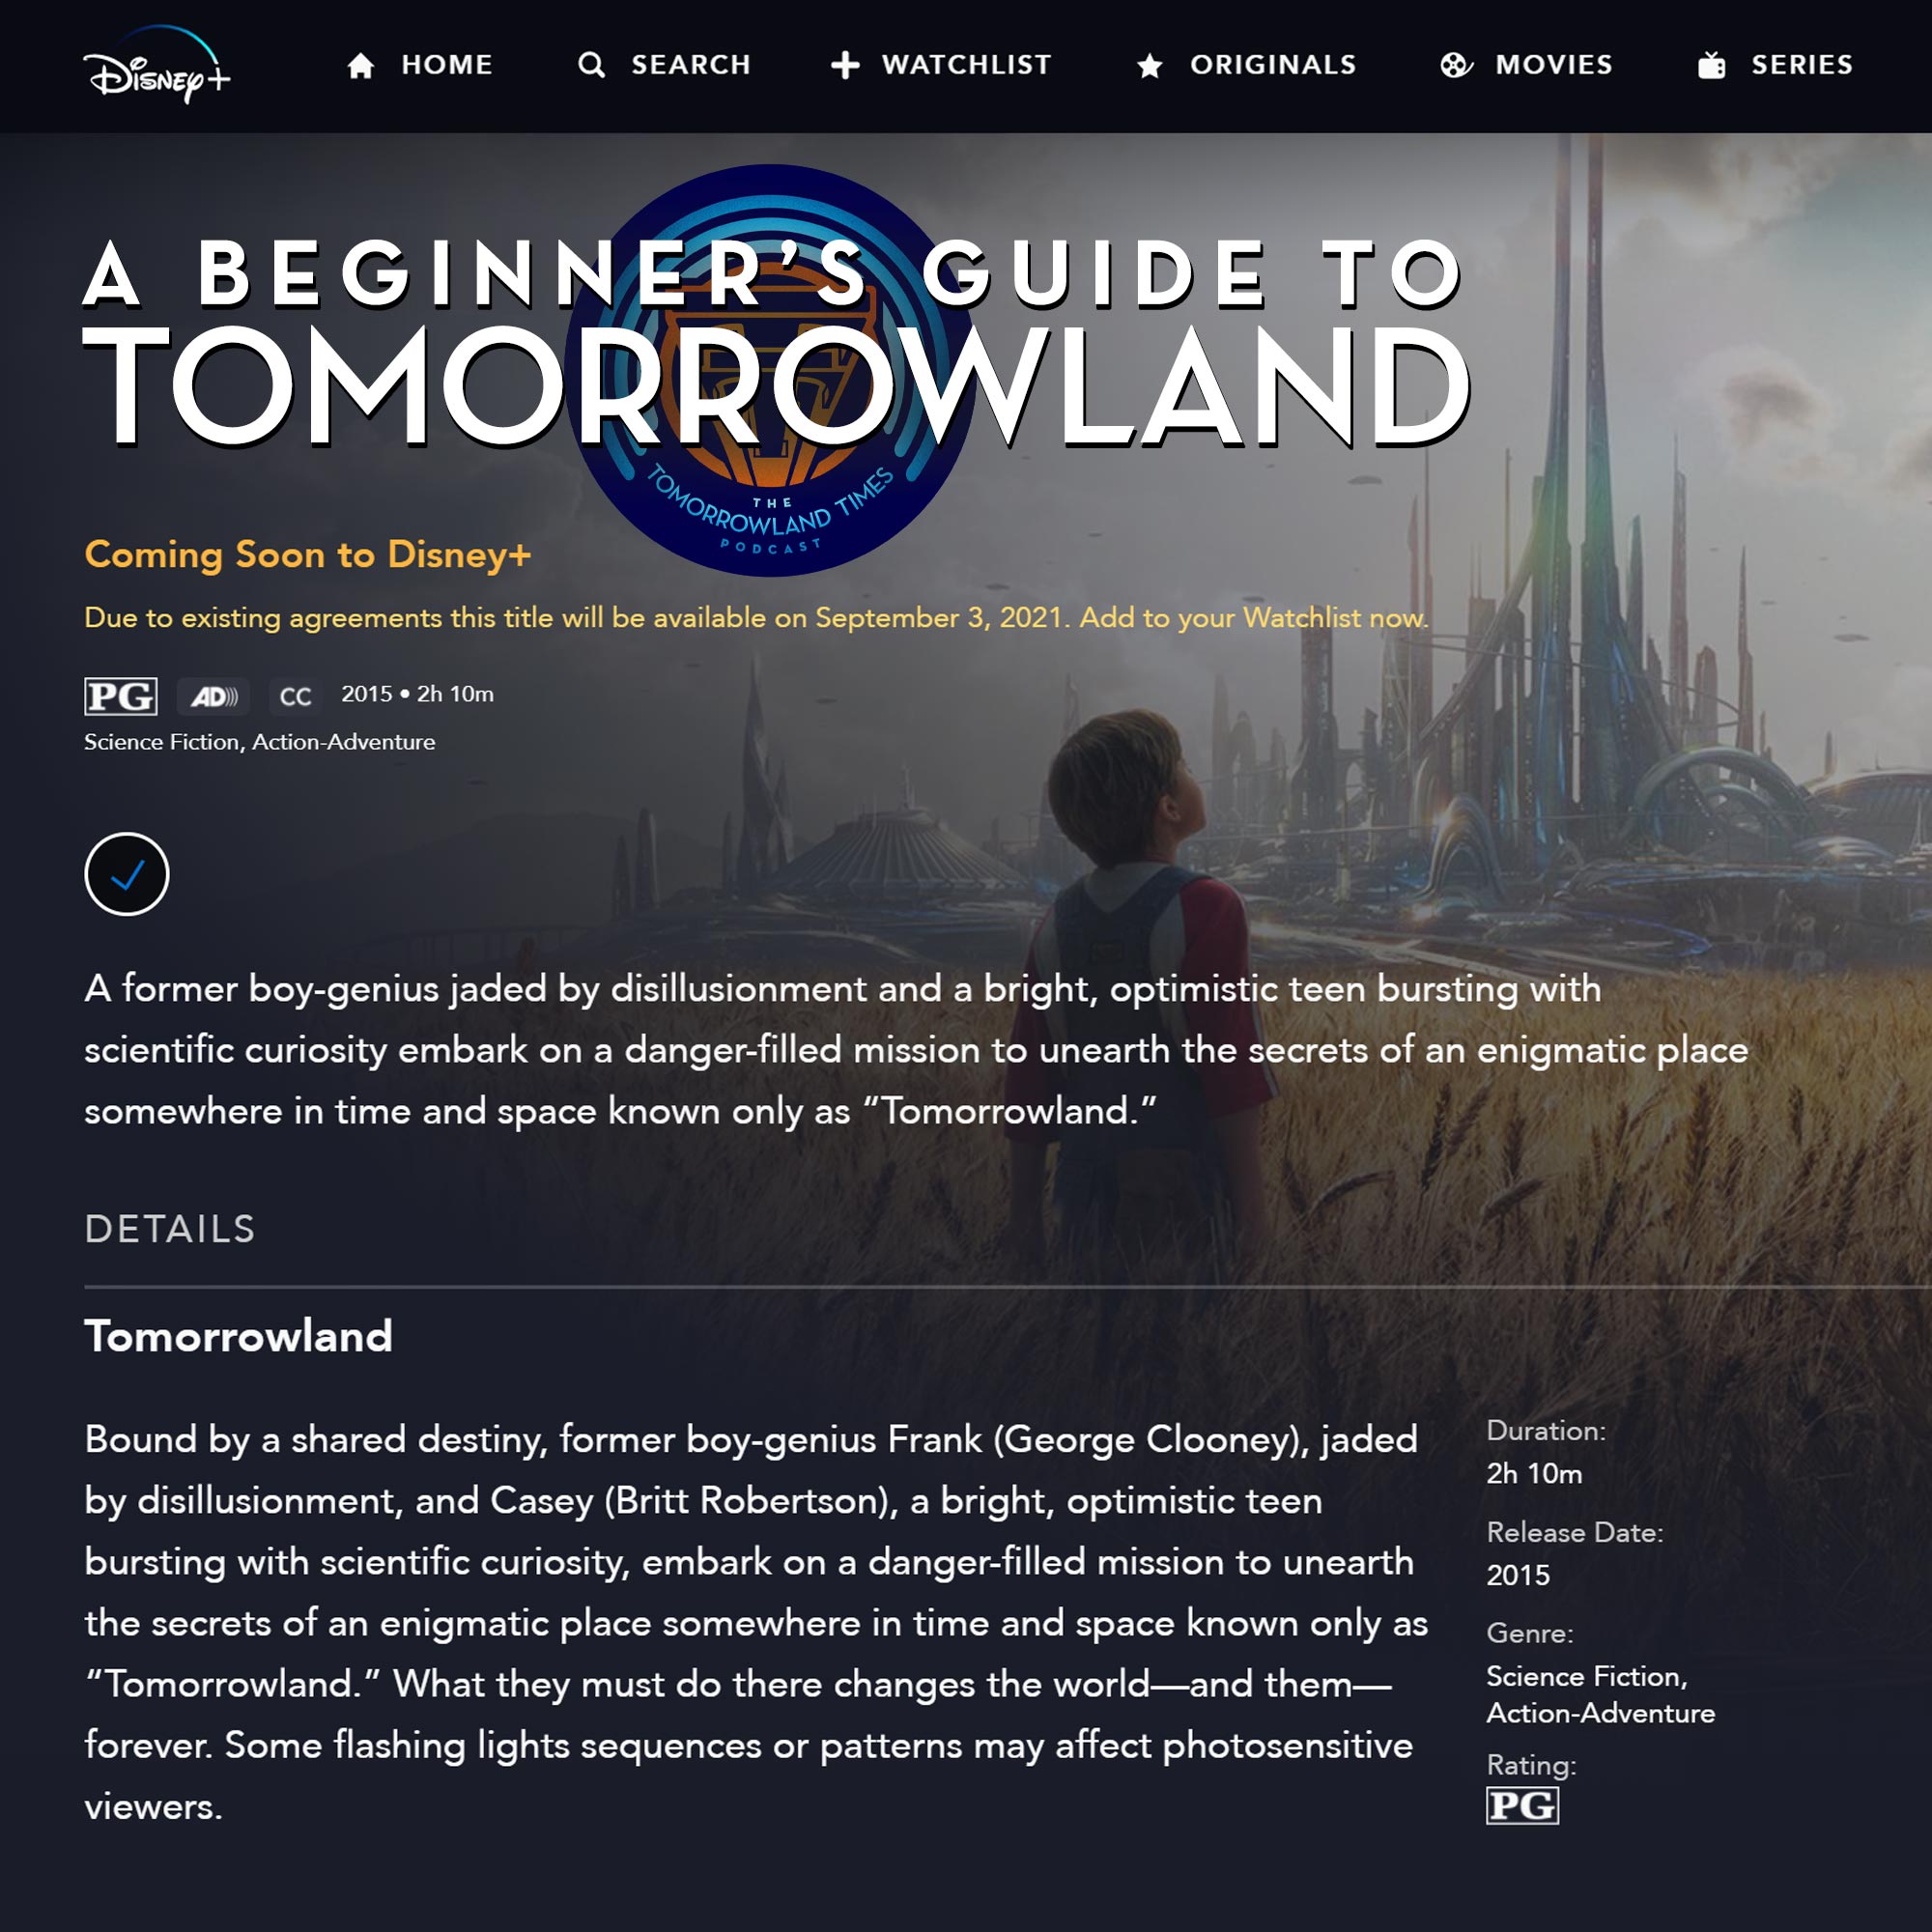 A Beginner’s Guide to Tomorrowland